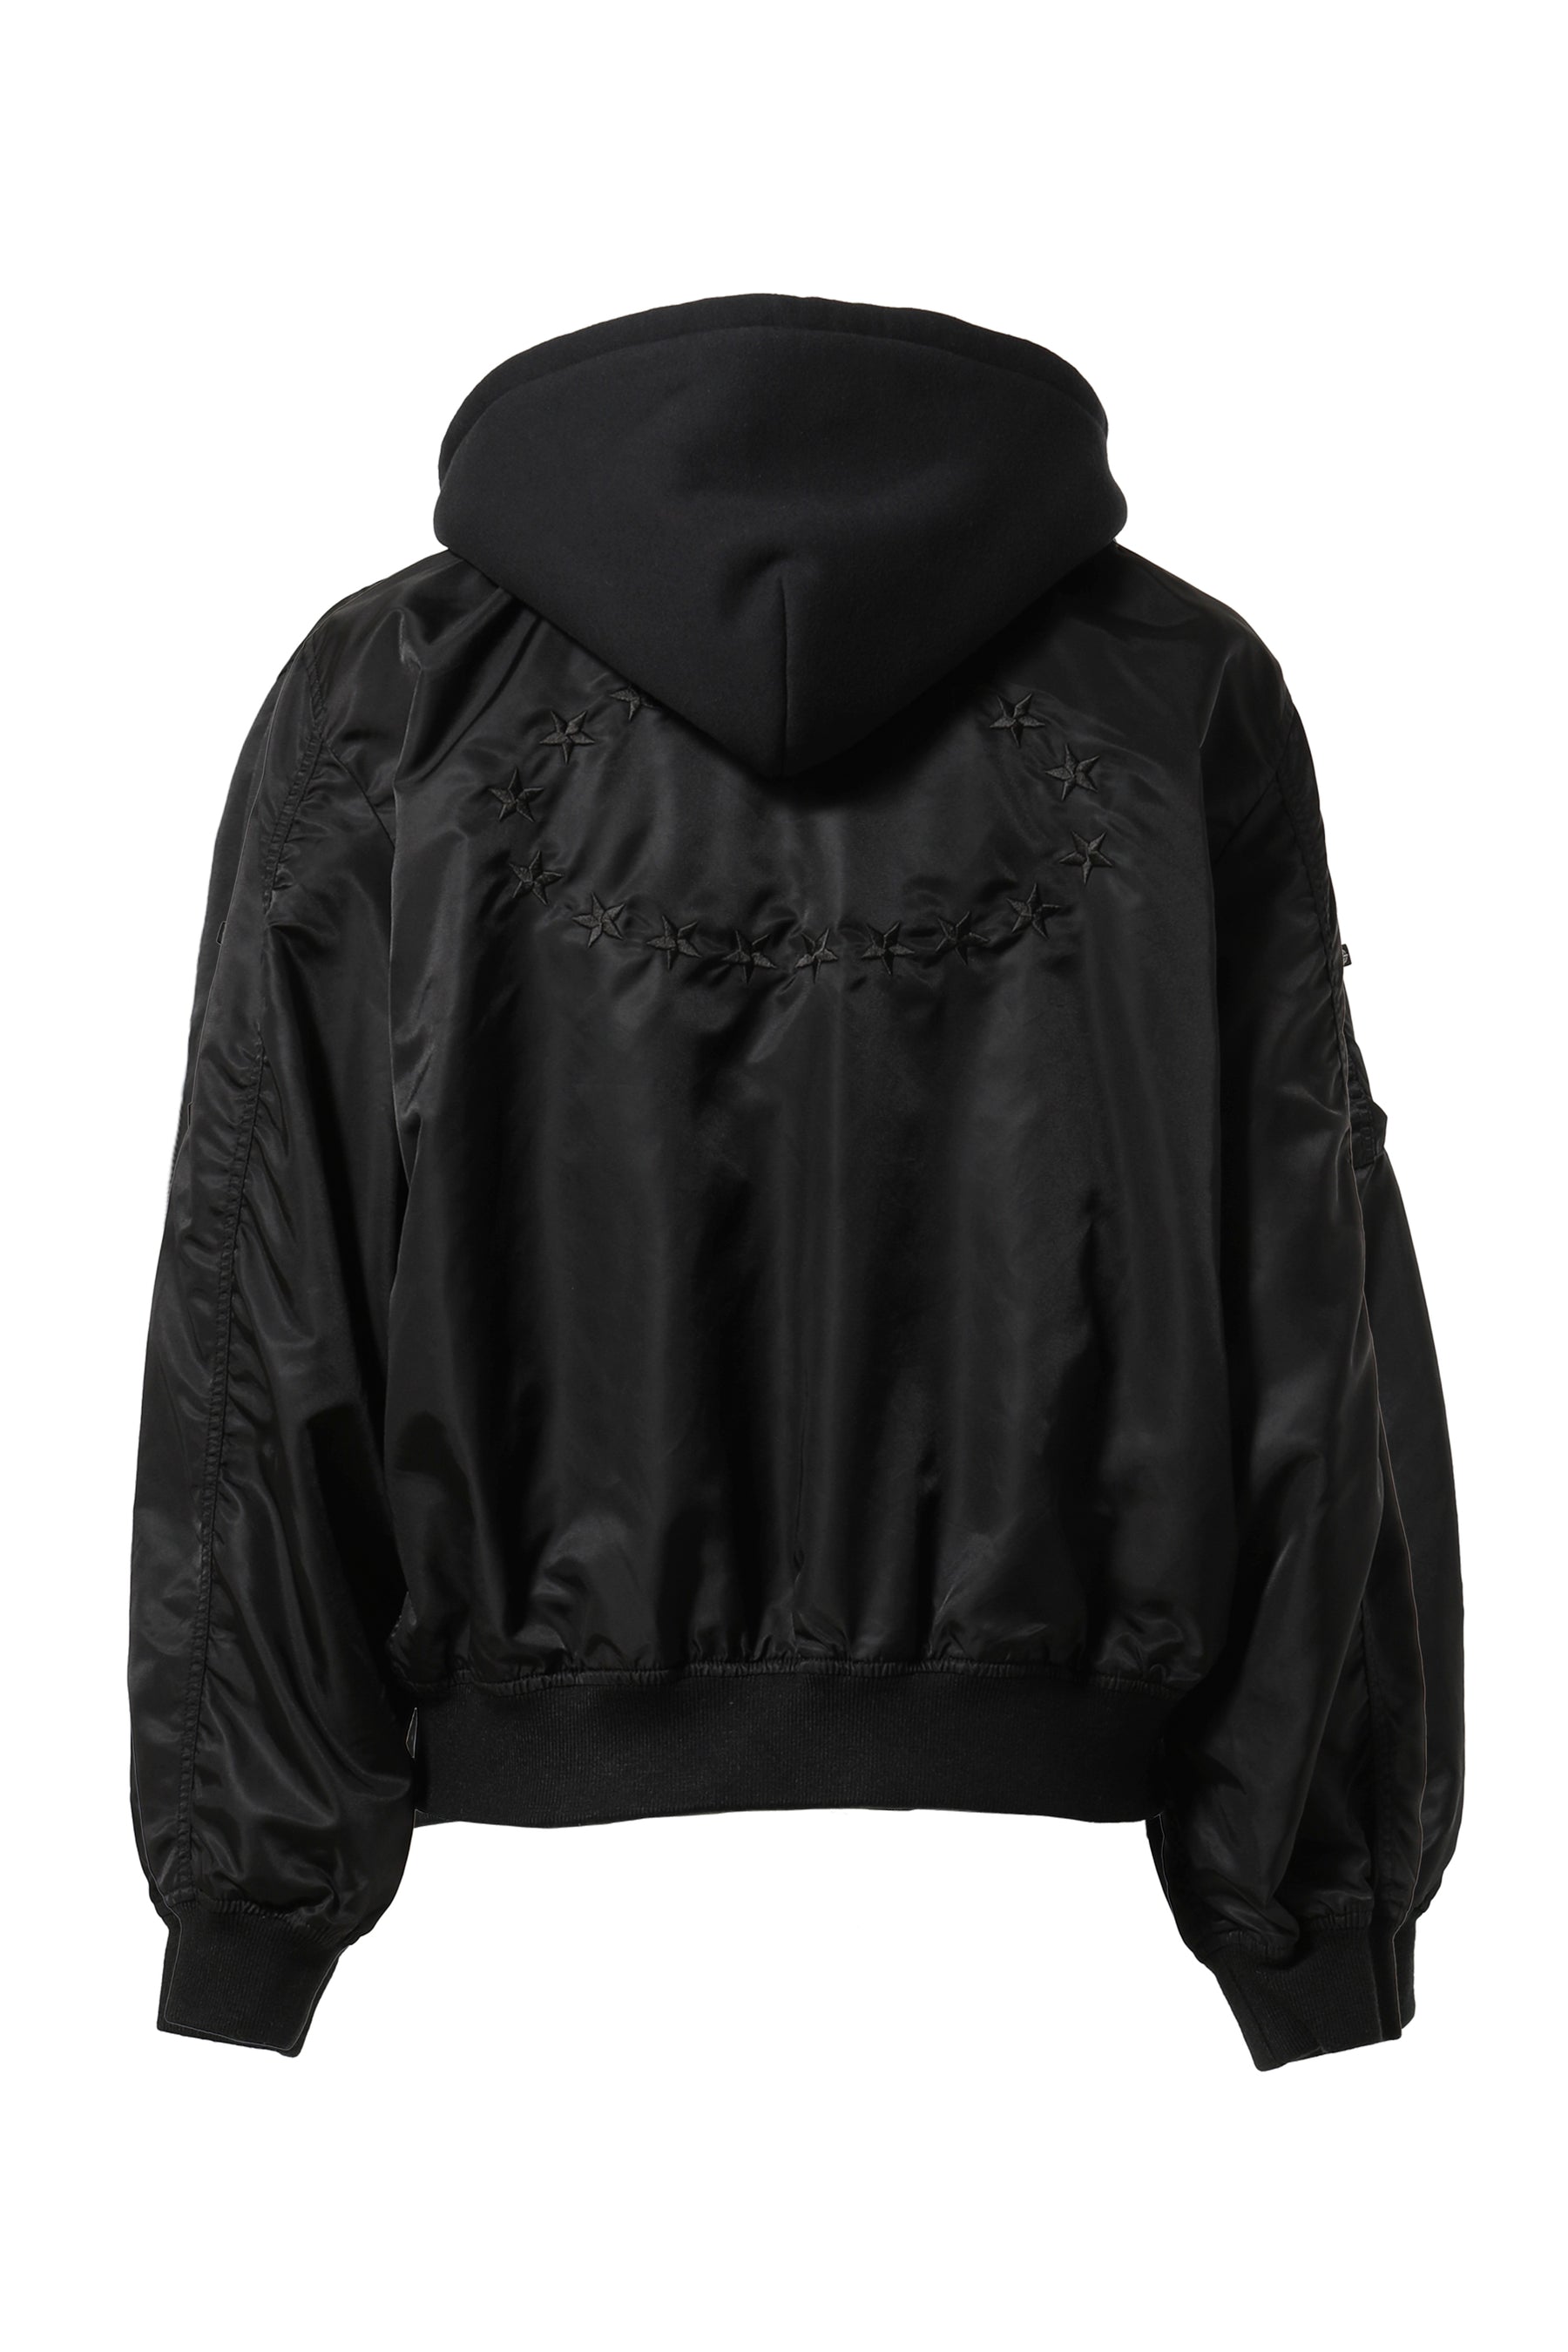 HOODED MA-1 / BLK